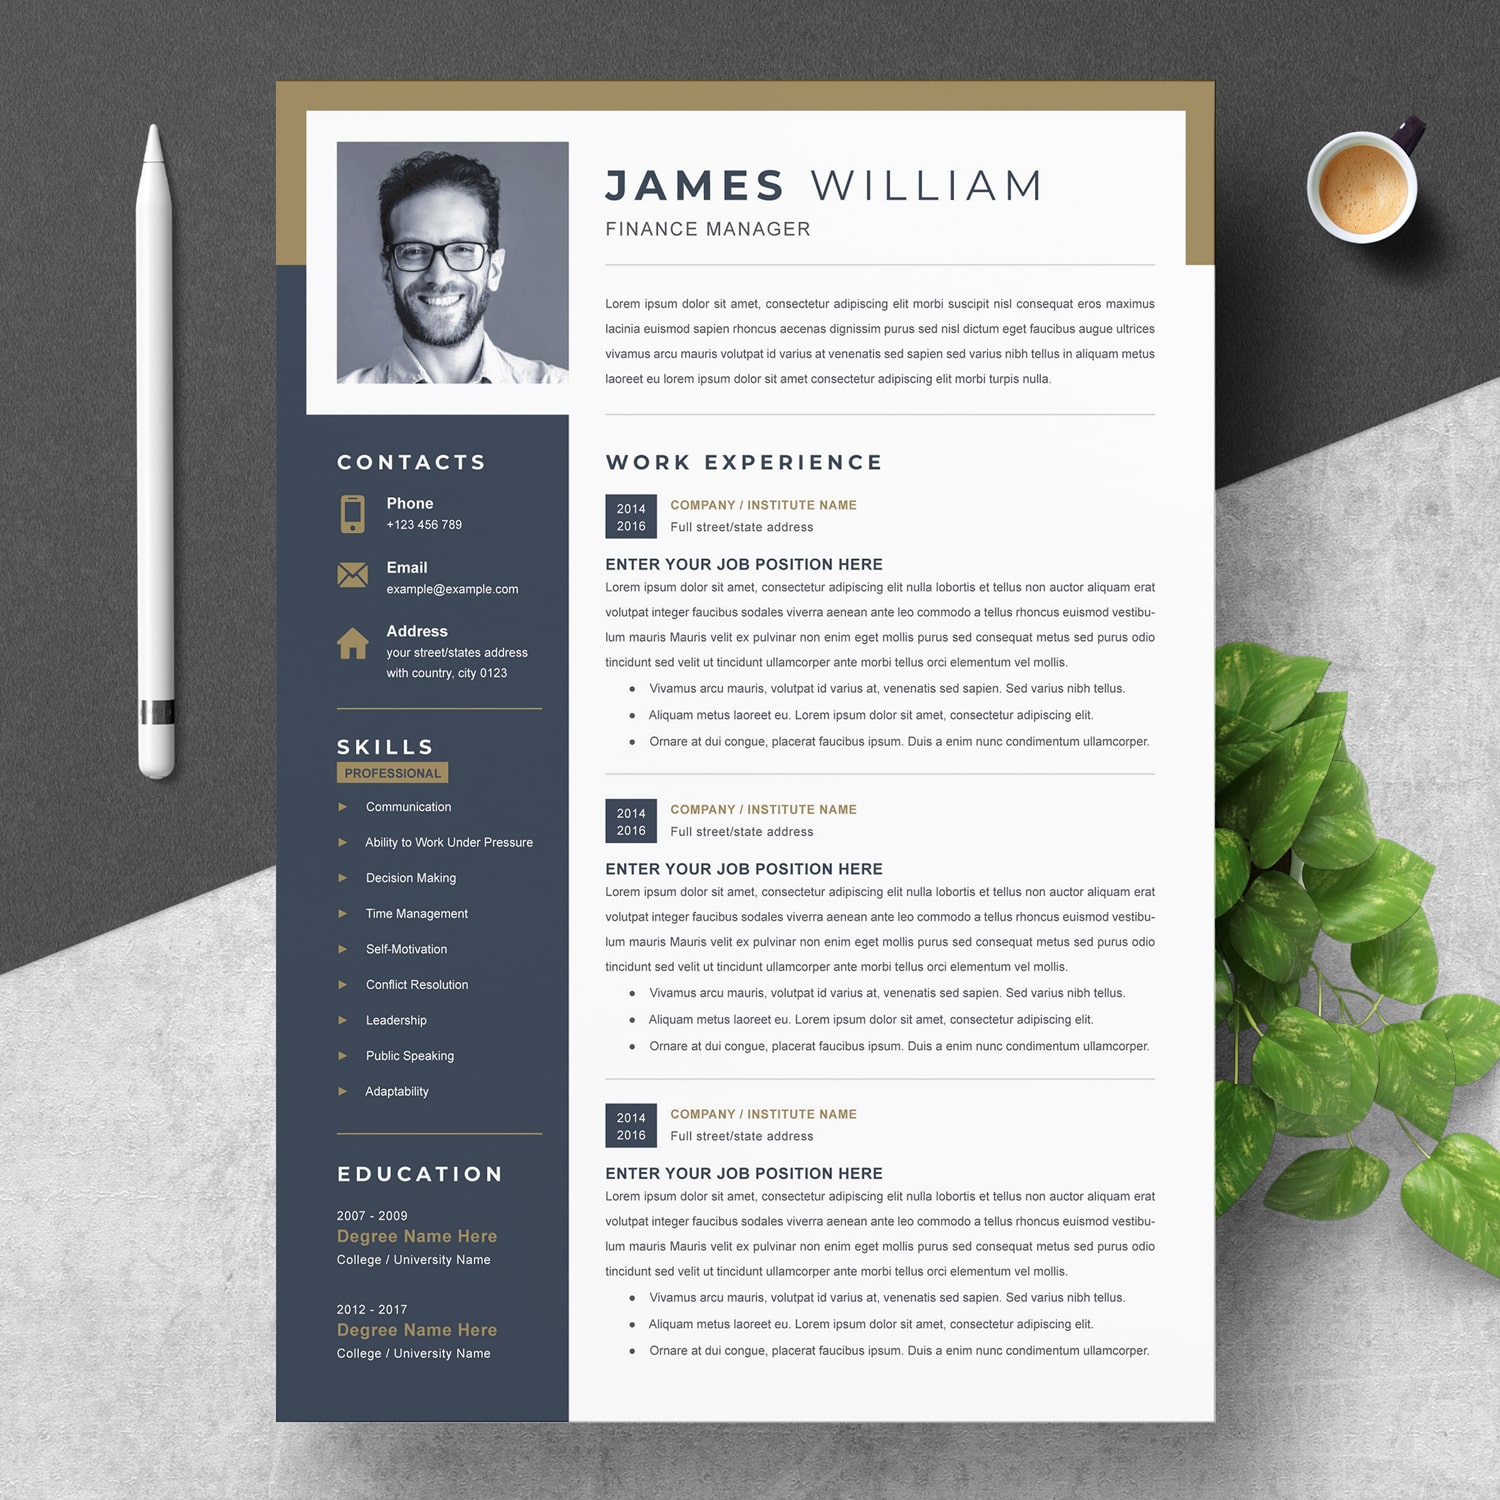 Model Cv 2021 / Best Resume Formats For 2021 3 Professional Examples ...